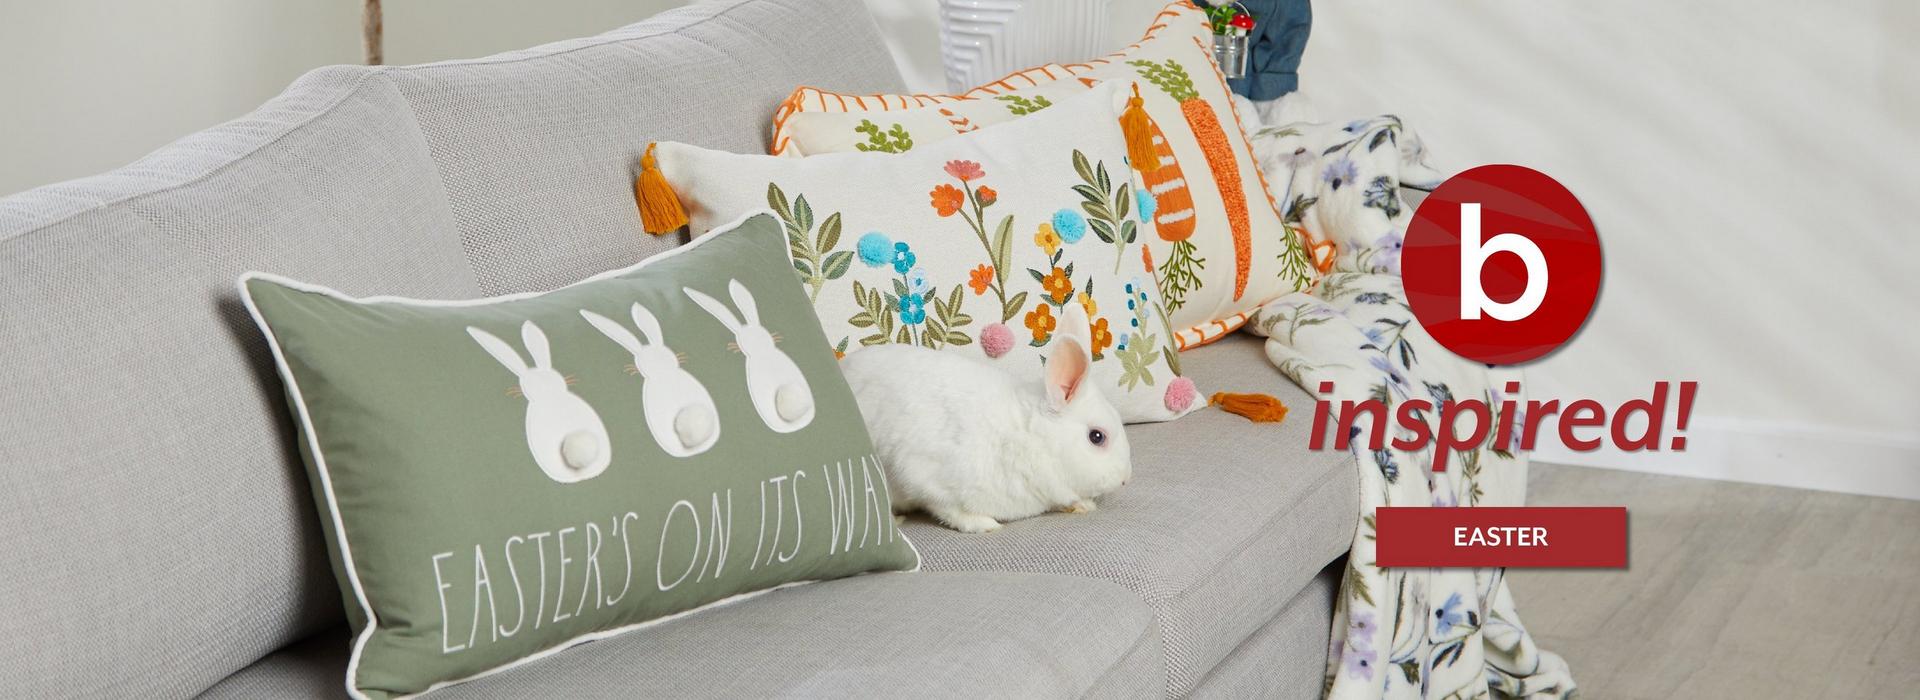 b inspired - shop Easter décor and more at bealls.com